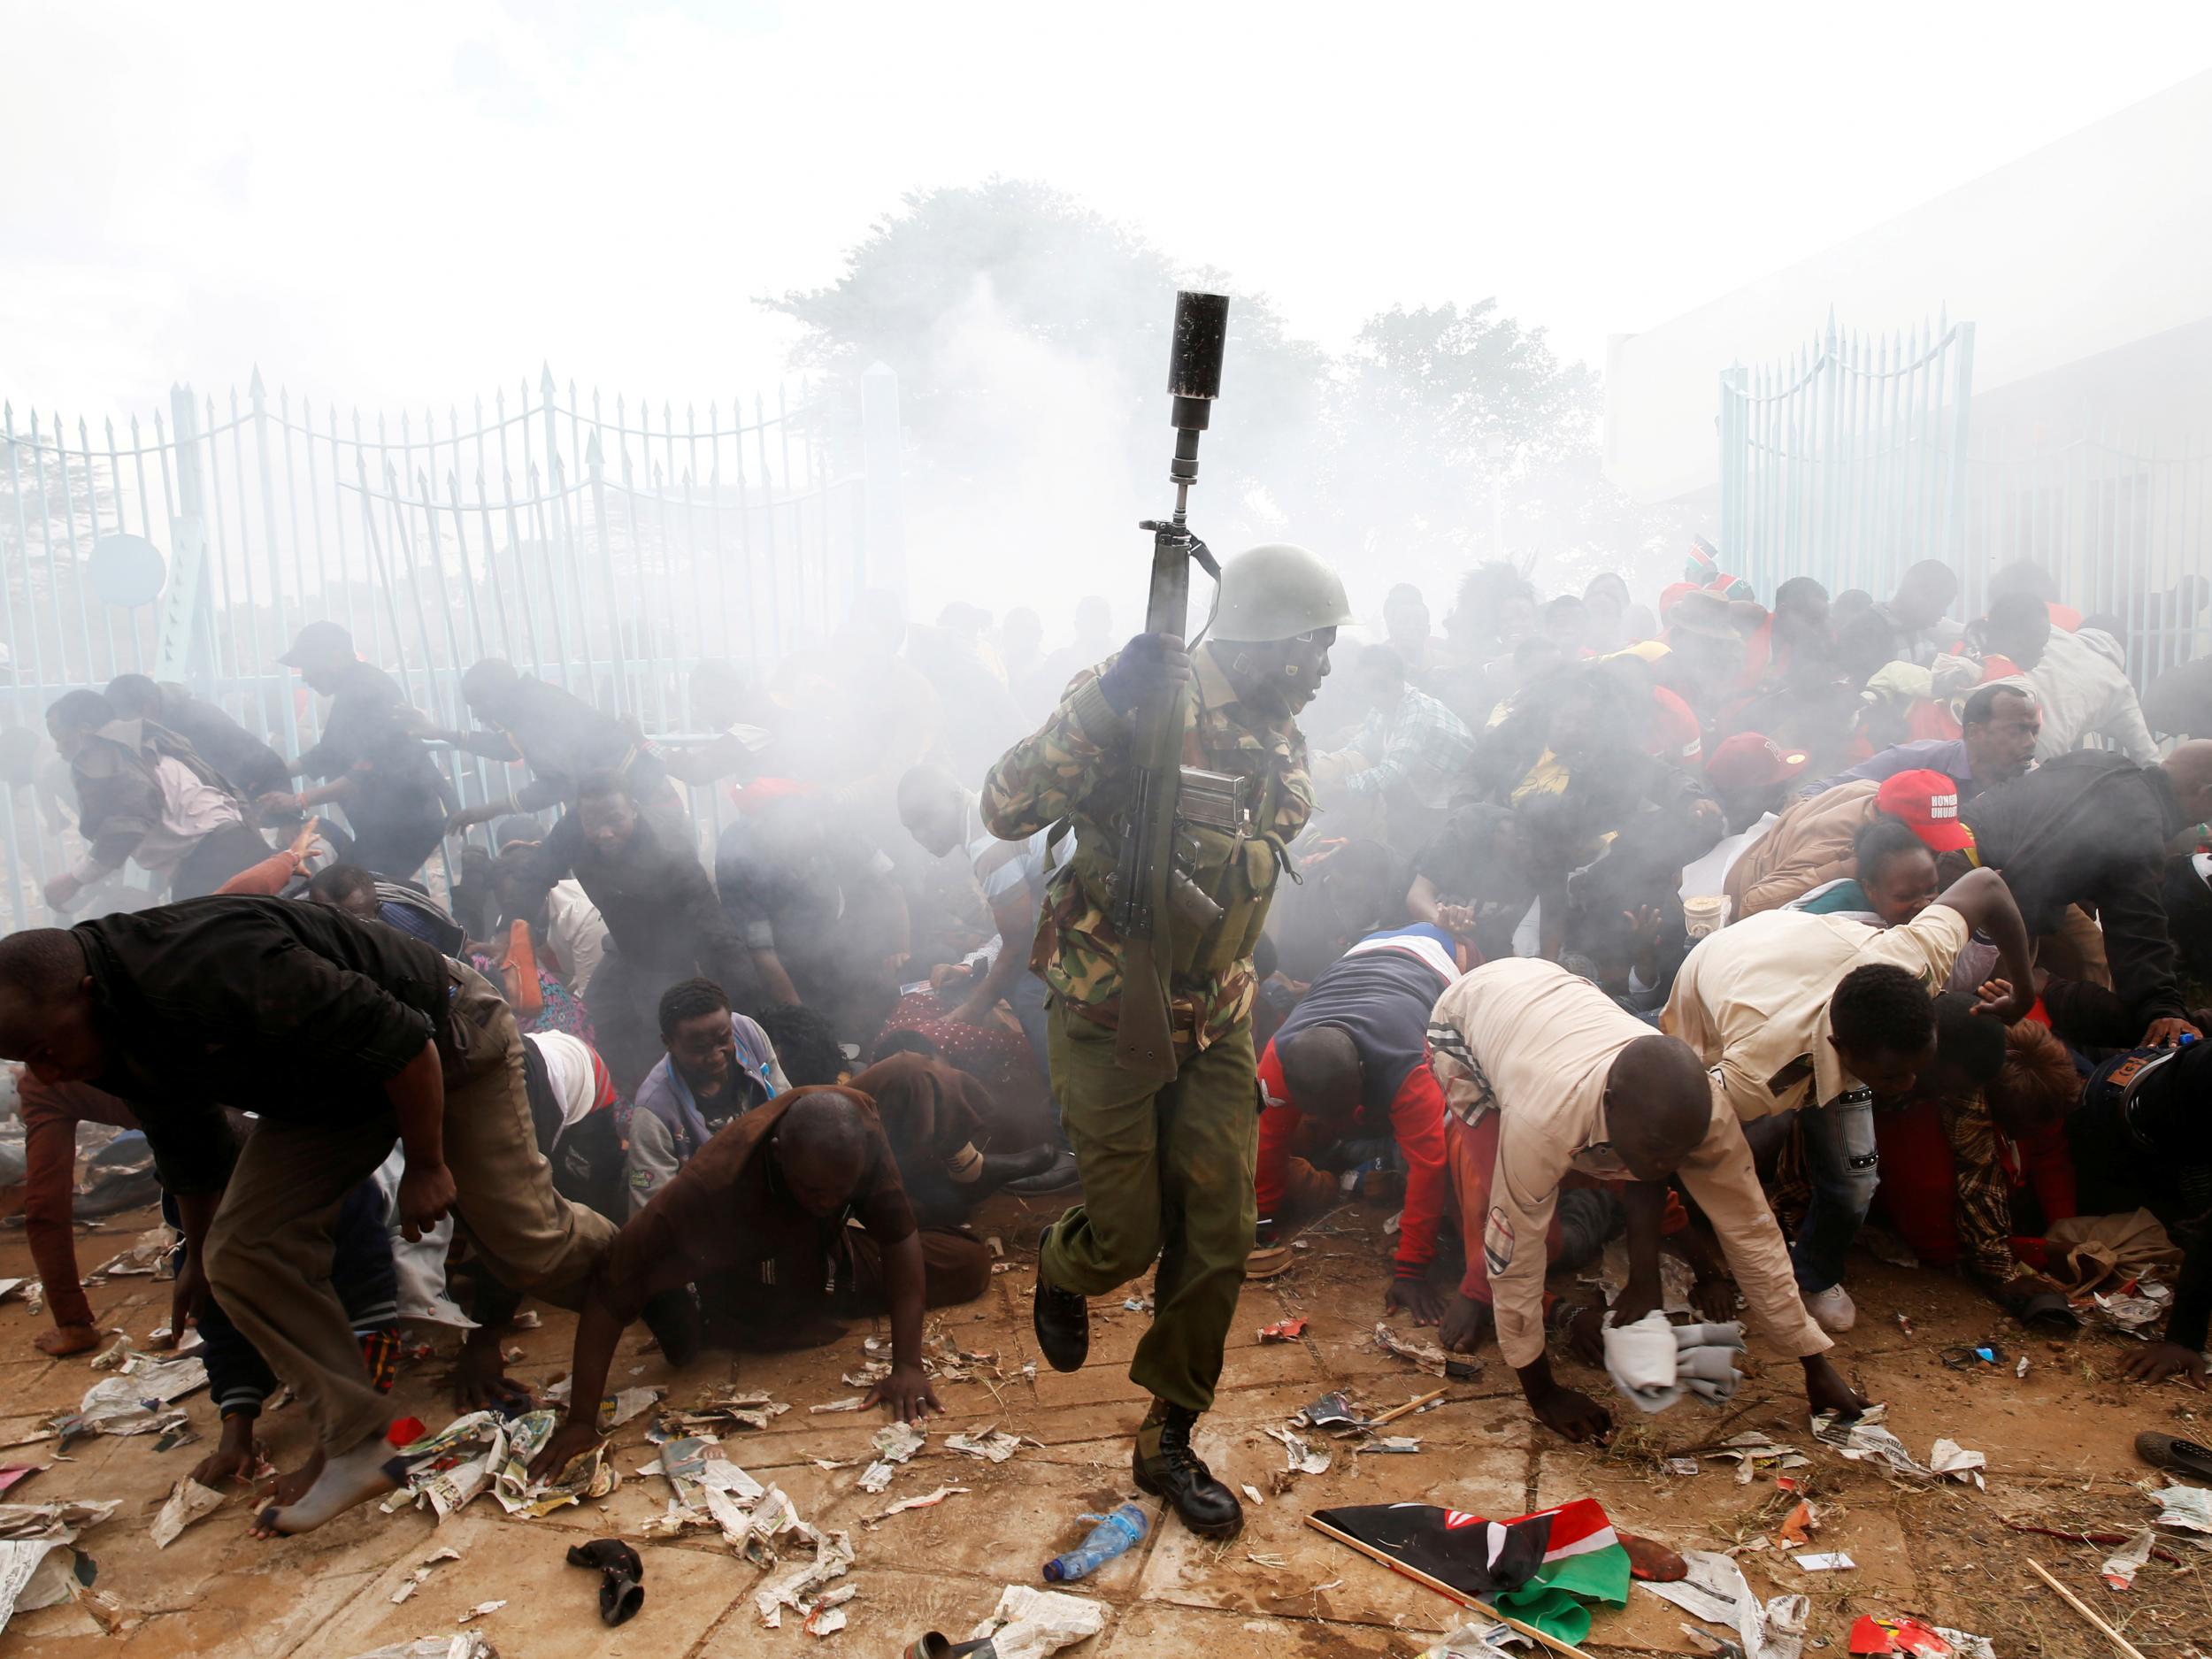 People fall as police fire tear gas to try control a crowd trying to force their way into a stadium to attend the inauguration of President Uhuru Kenyatta at Kasarani Stadium in Nairobi (Reuters)